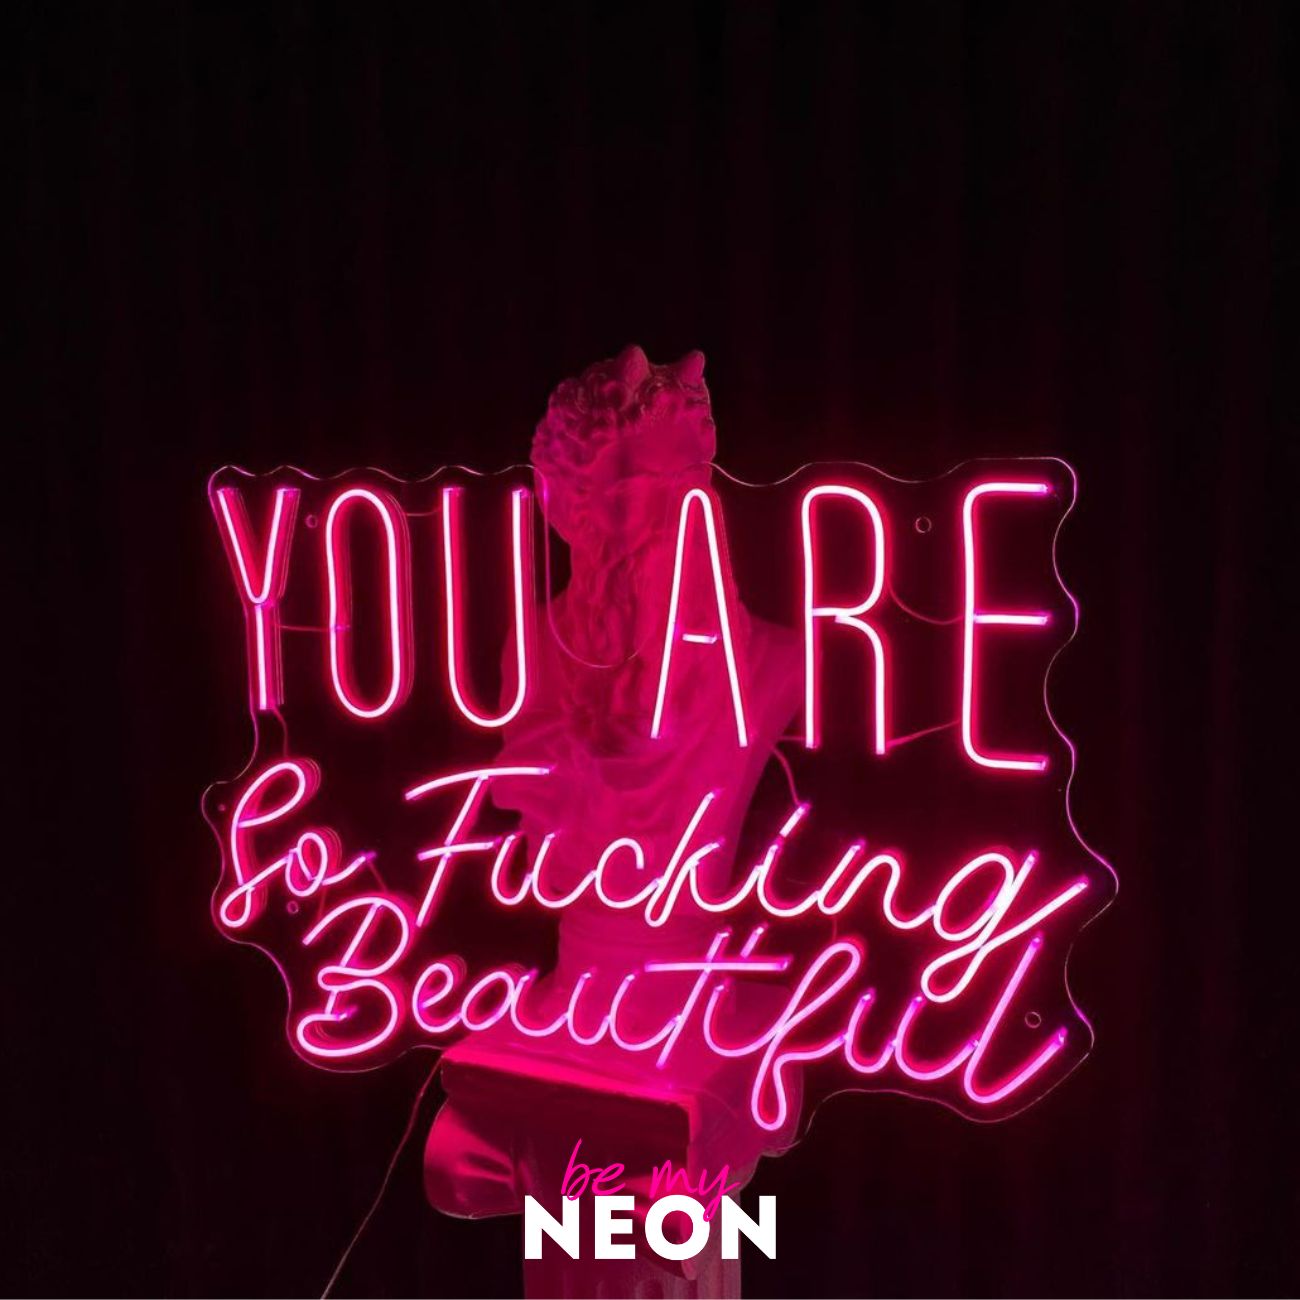 "You are so beautiful" LED Neonschild